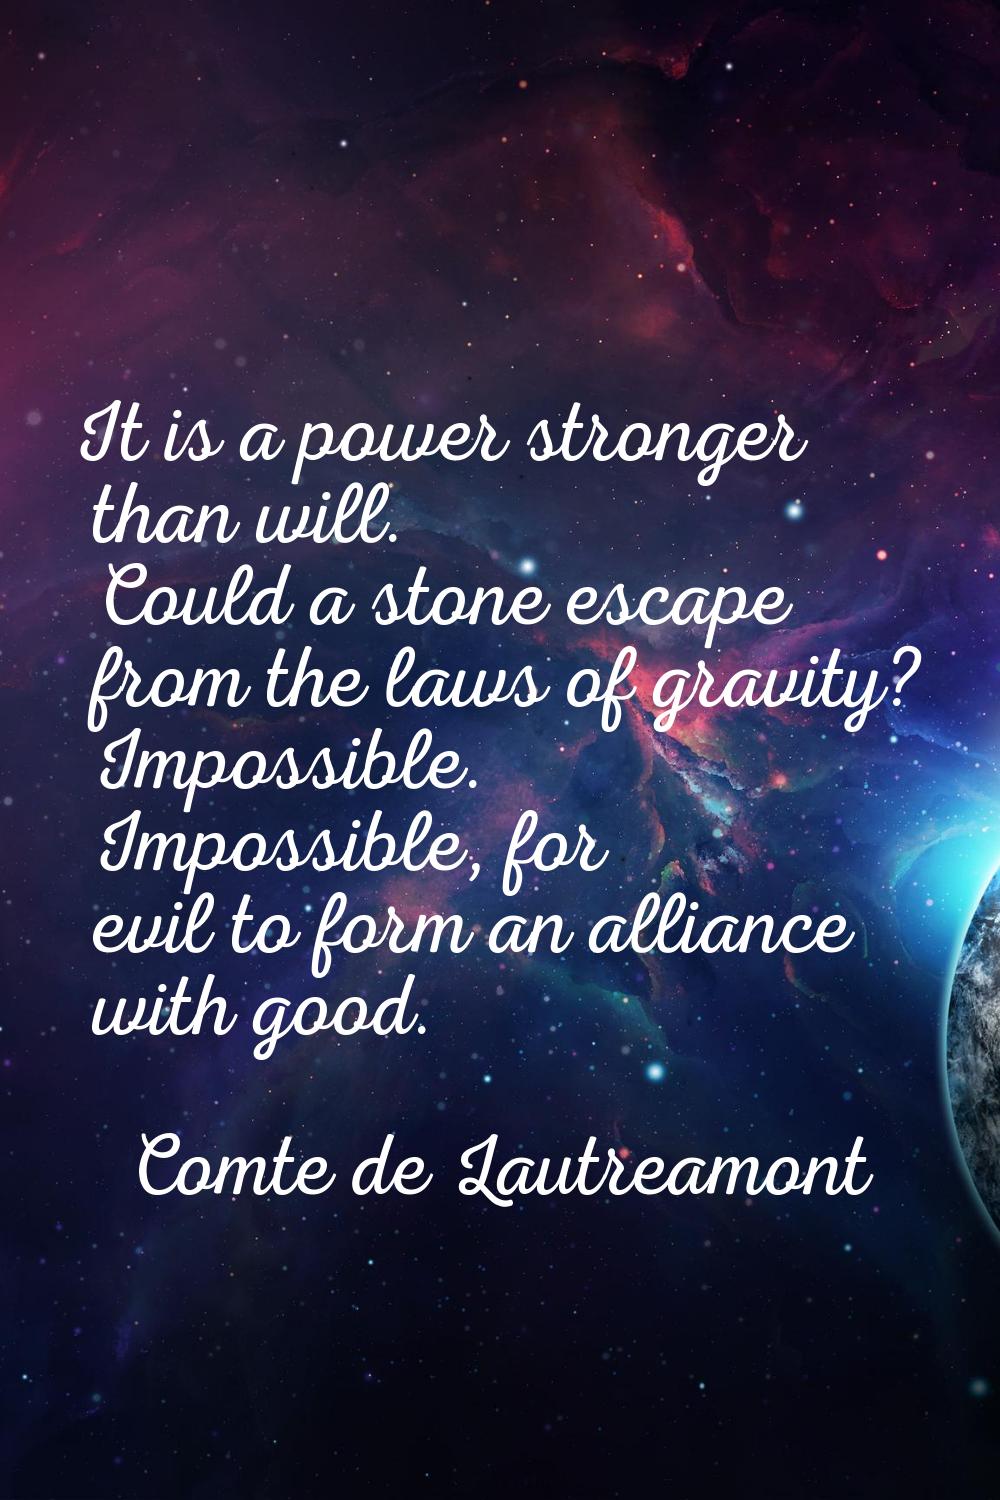 It is a power stronger than will. Could a stone escape from the laws of gravity? Impossible. Imposs